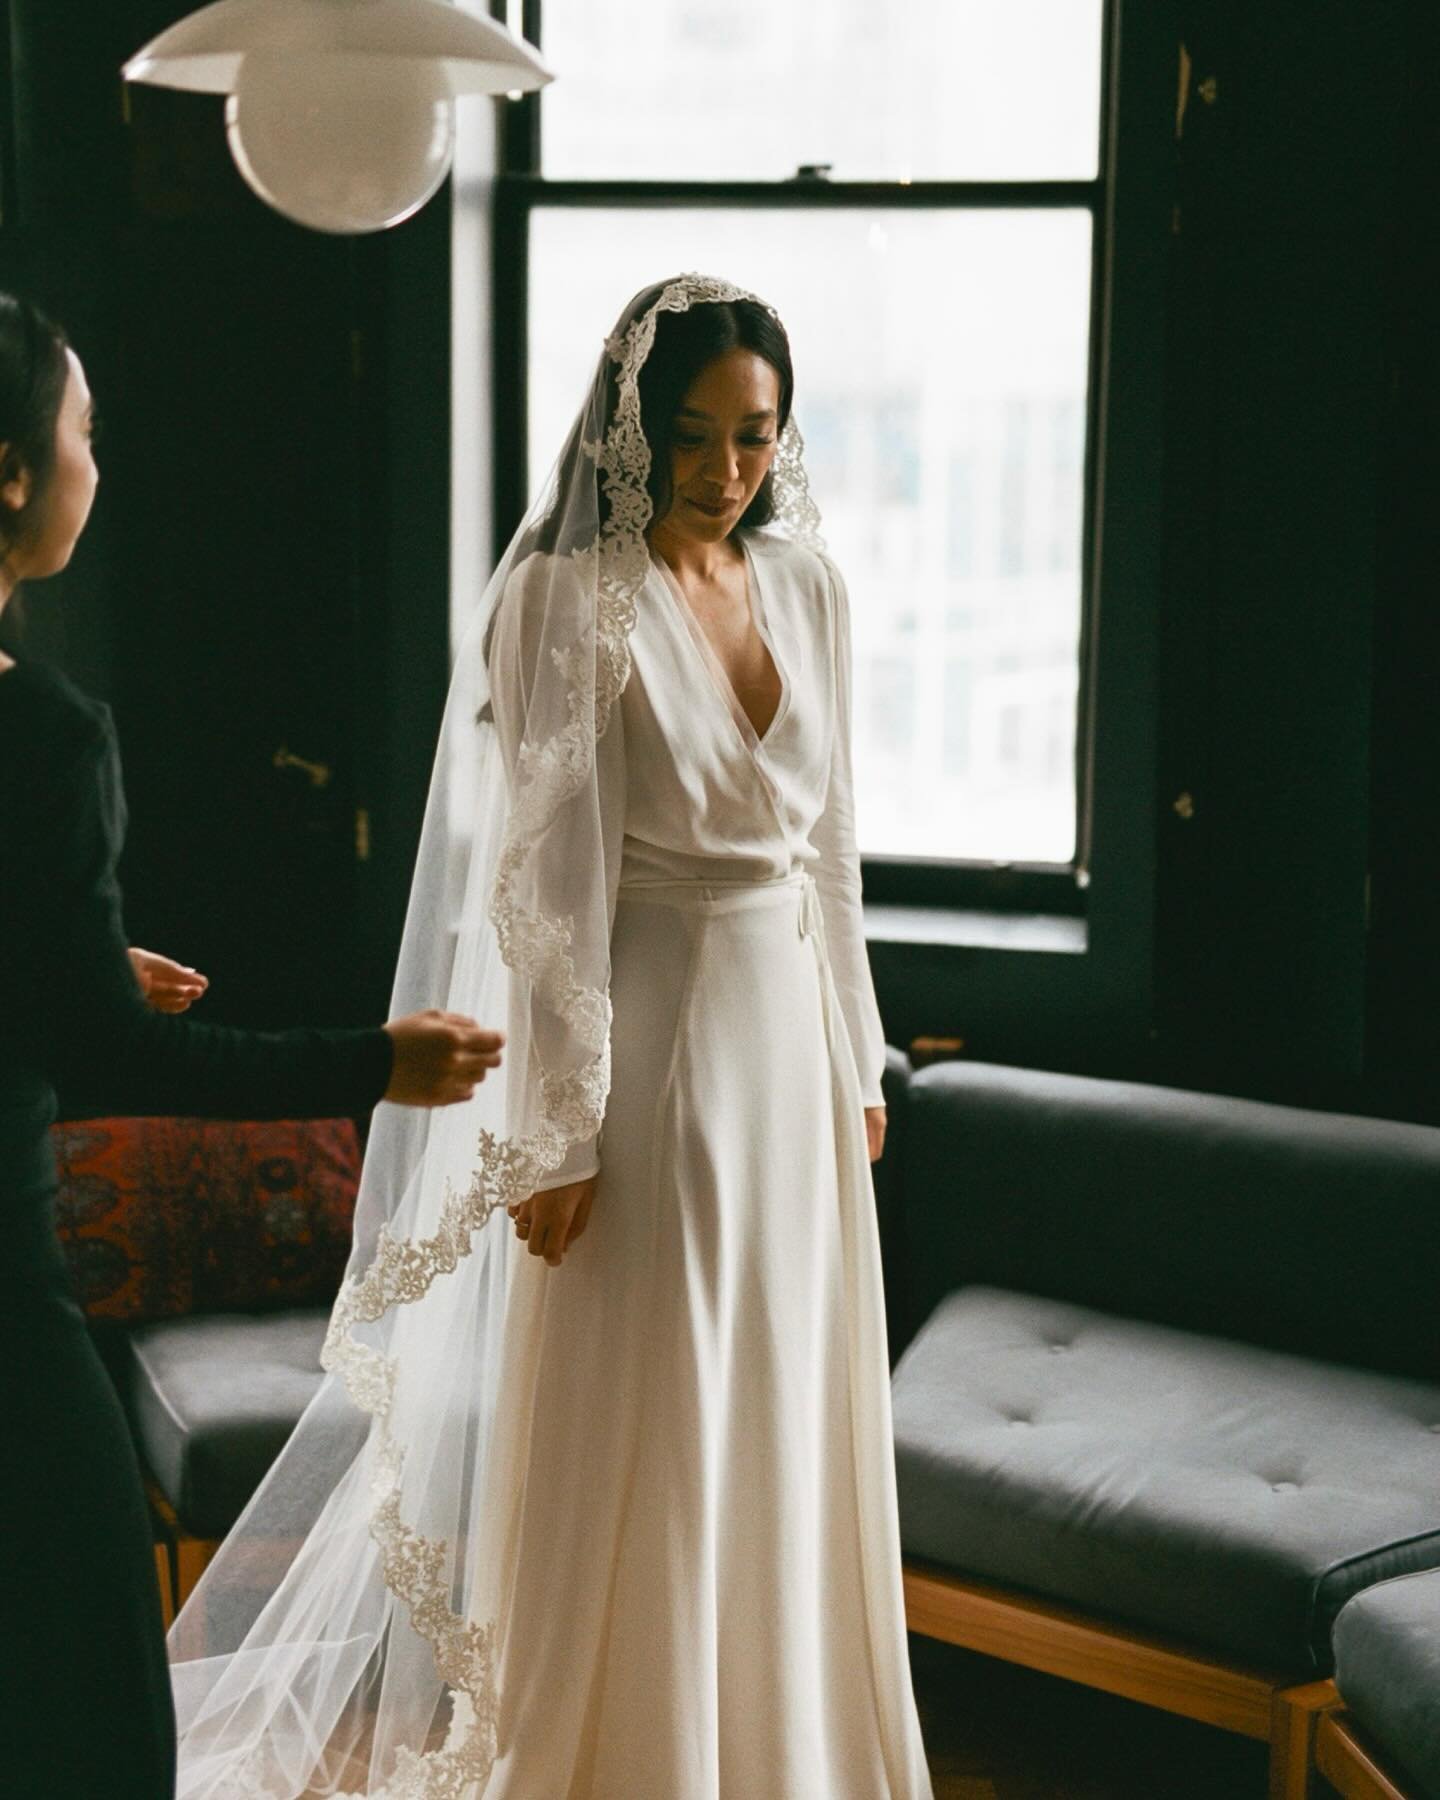 Pt. 1 of sweet Alyssa &amp; Will&rsquo;s wedding in the Big Apple. I took these and yet it still doesn&rsquo;t feel real 🤍🗽 Their day began @acehotelnewyork, with the most precious first look followed by private vows. Mother Nature also gifted us w